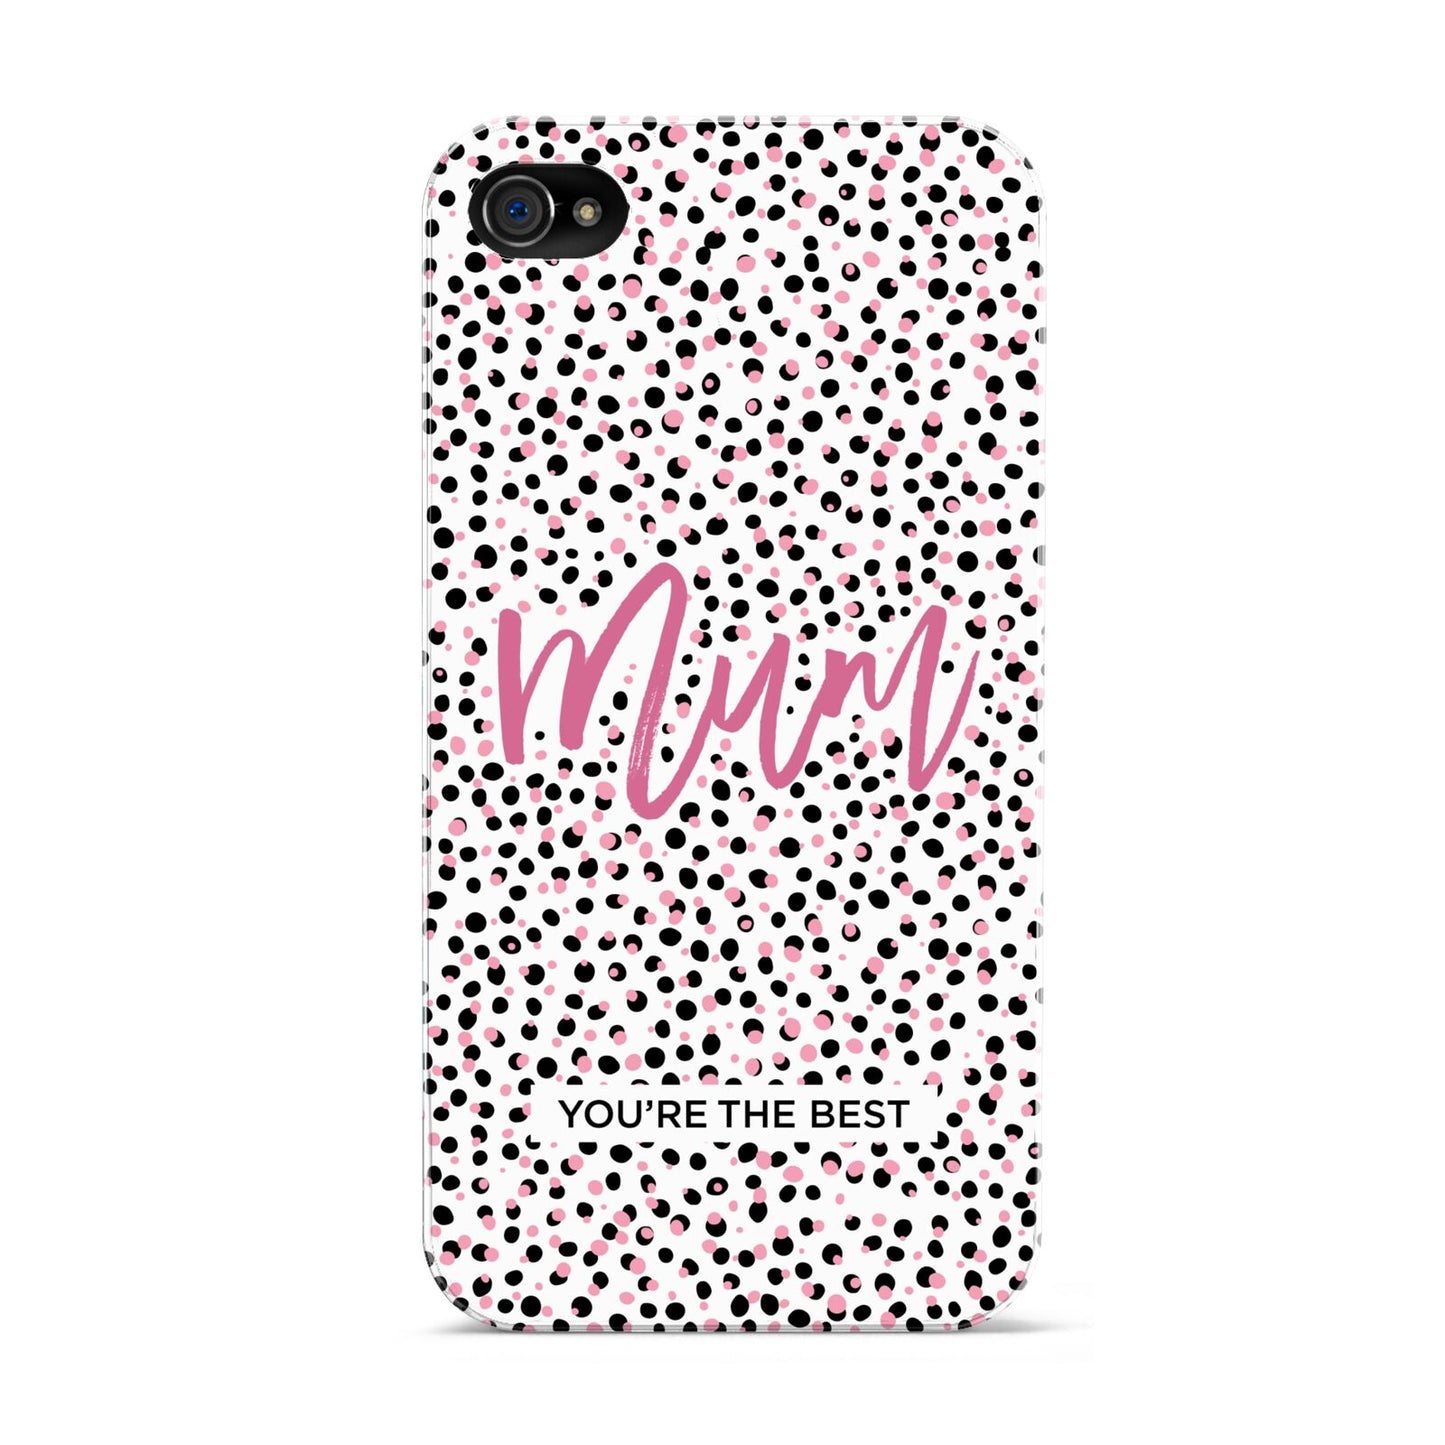 Mum Polka Dots Mothers Day Apple iPhone 4s Case